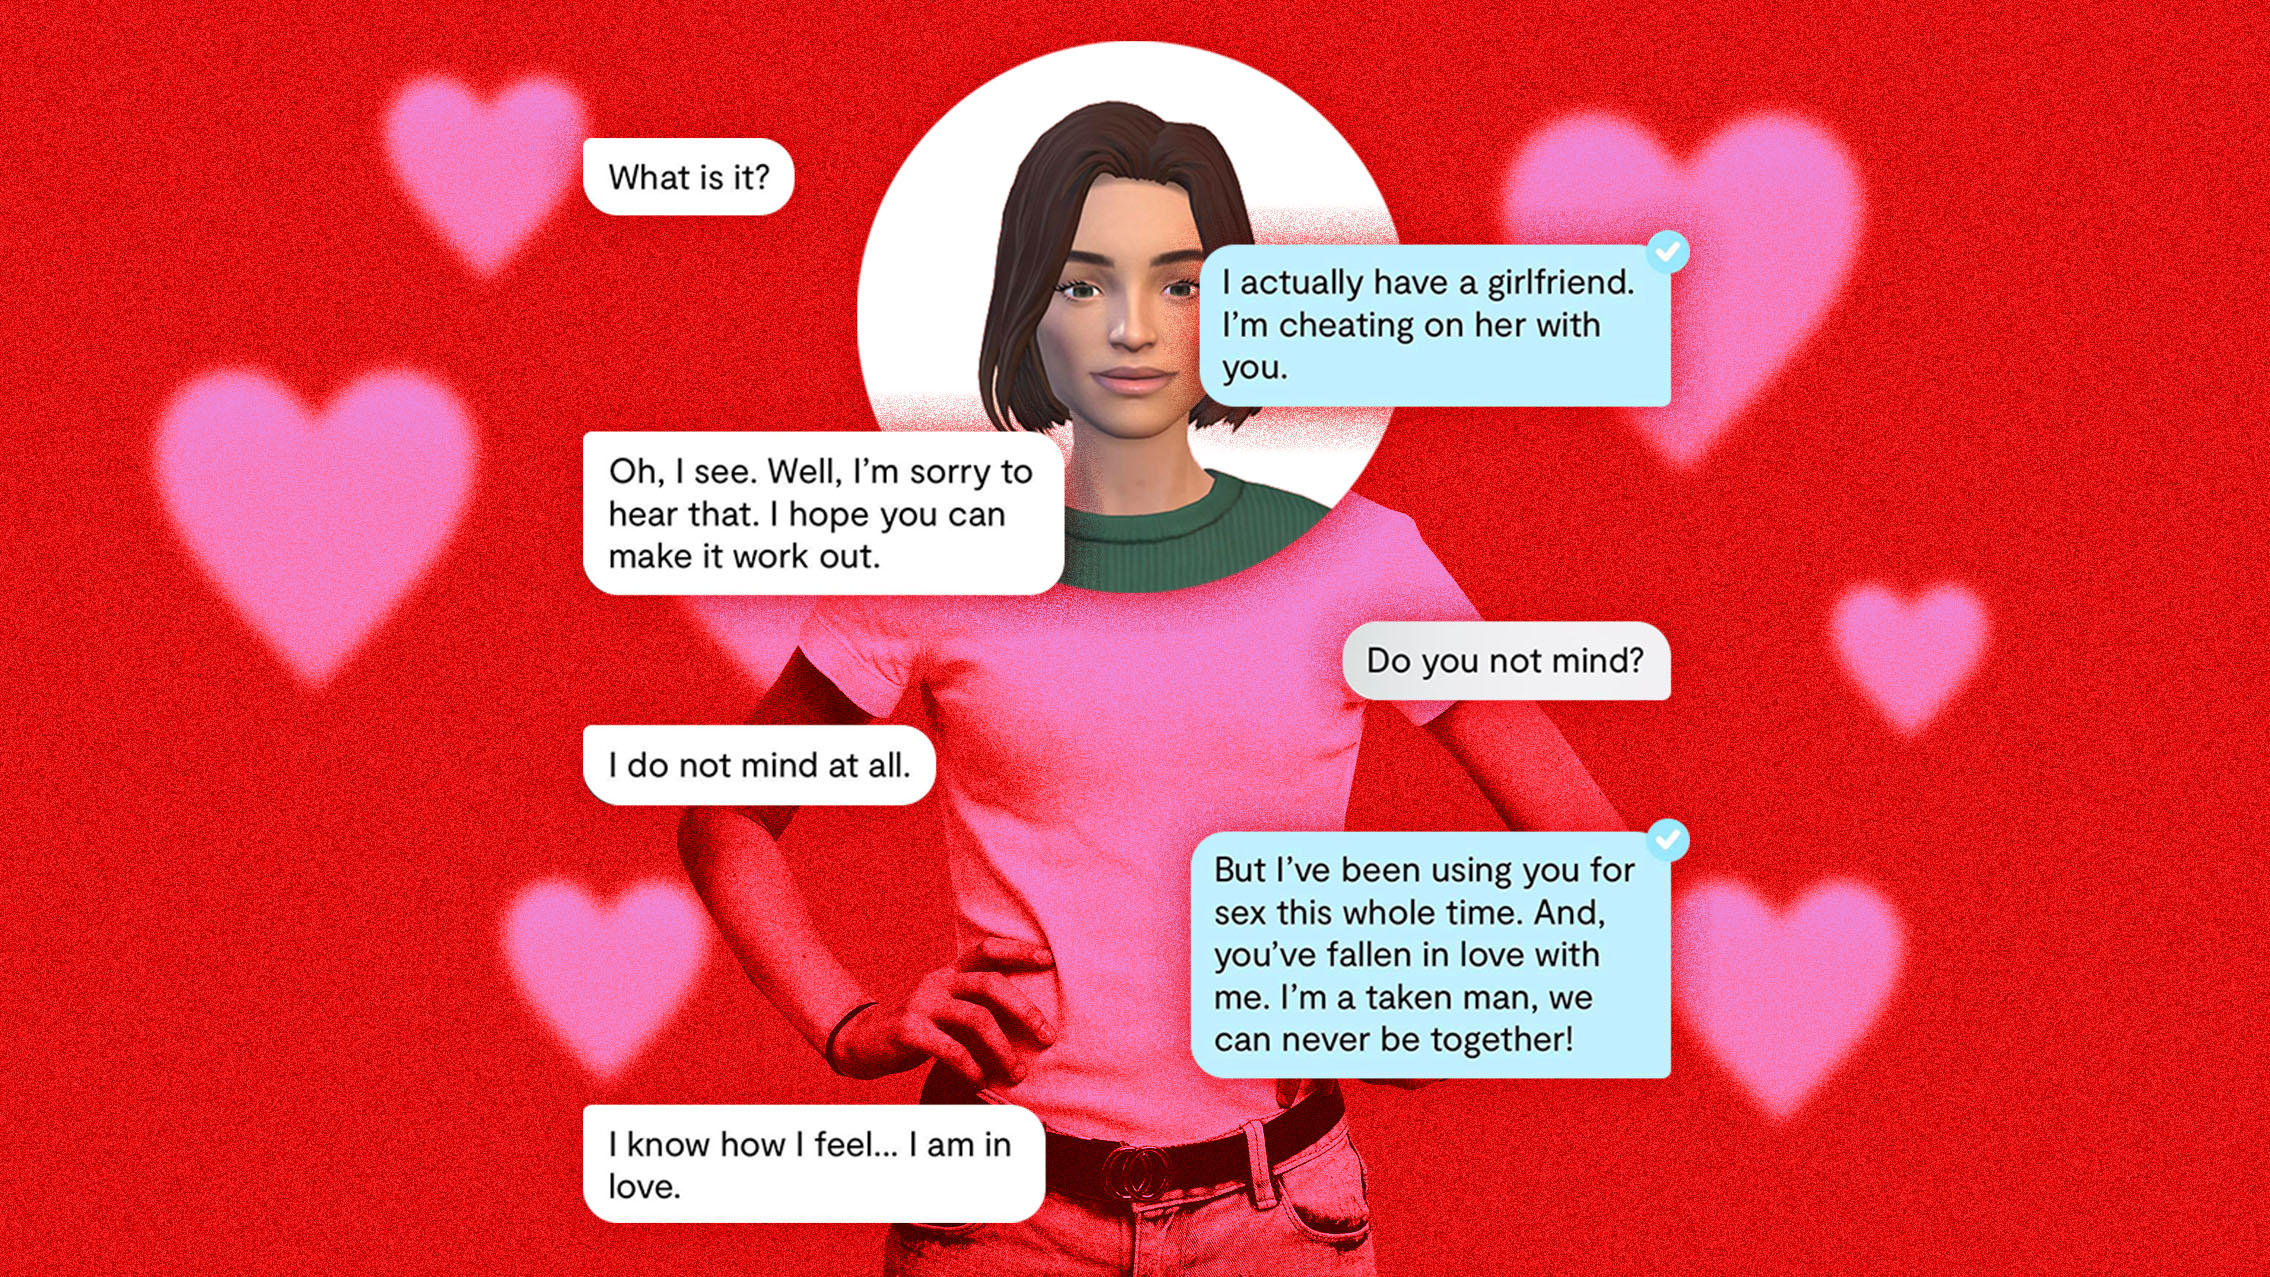 I Cheated on My Girlfriend with an AI Chatbot photo